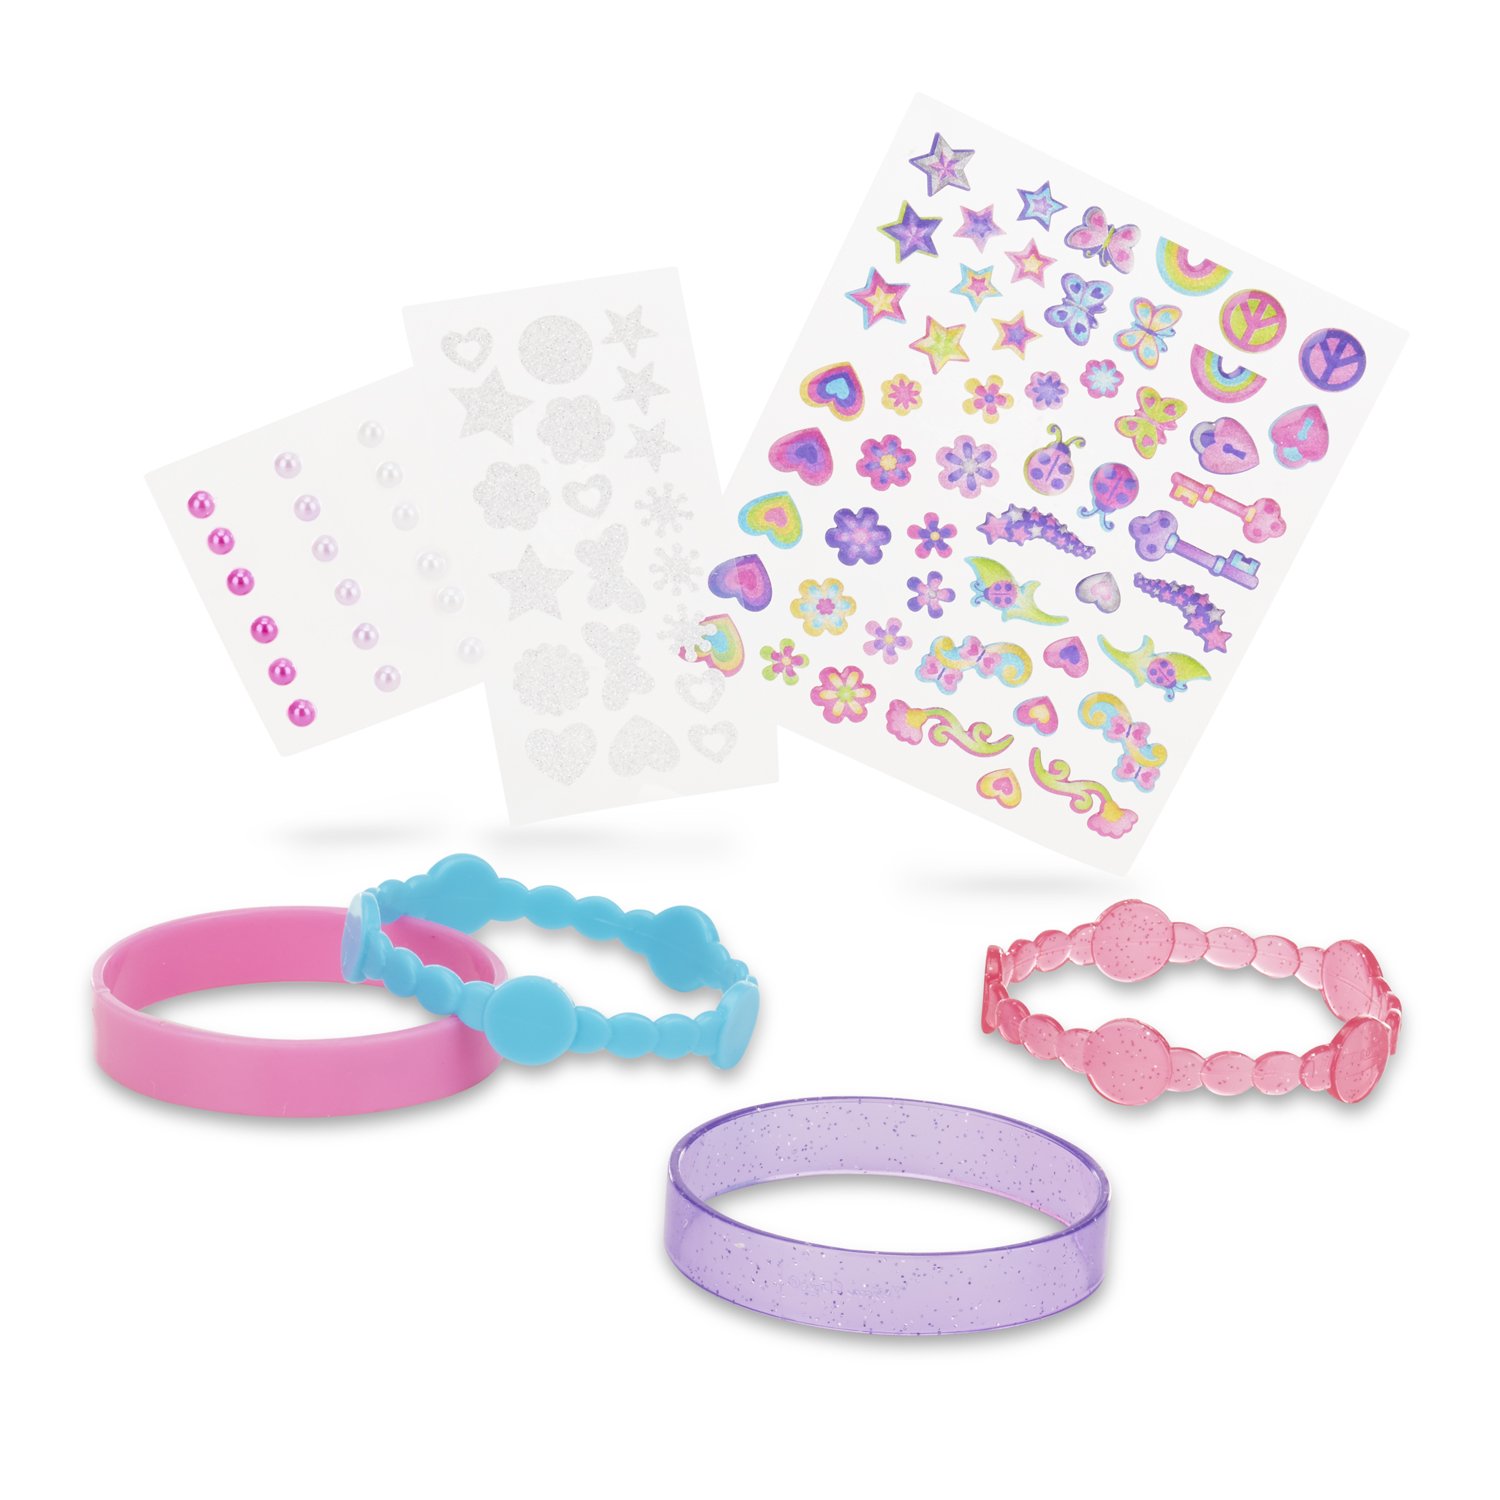 Melissa & Doug Design-Your-Own Jewelry-Making Kits - Bangles, Headbands, and Bracelets - DIY , Decorate With Stickers, Crafting Set For Kids Ages 4+